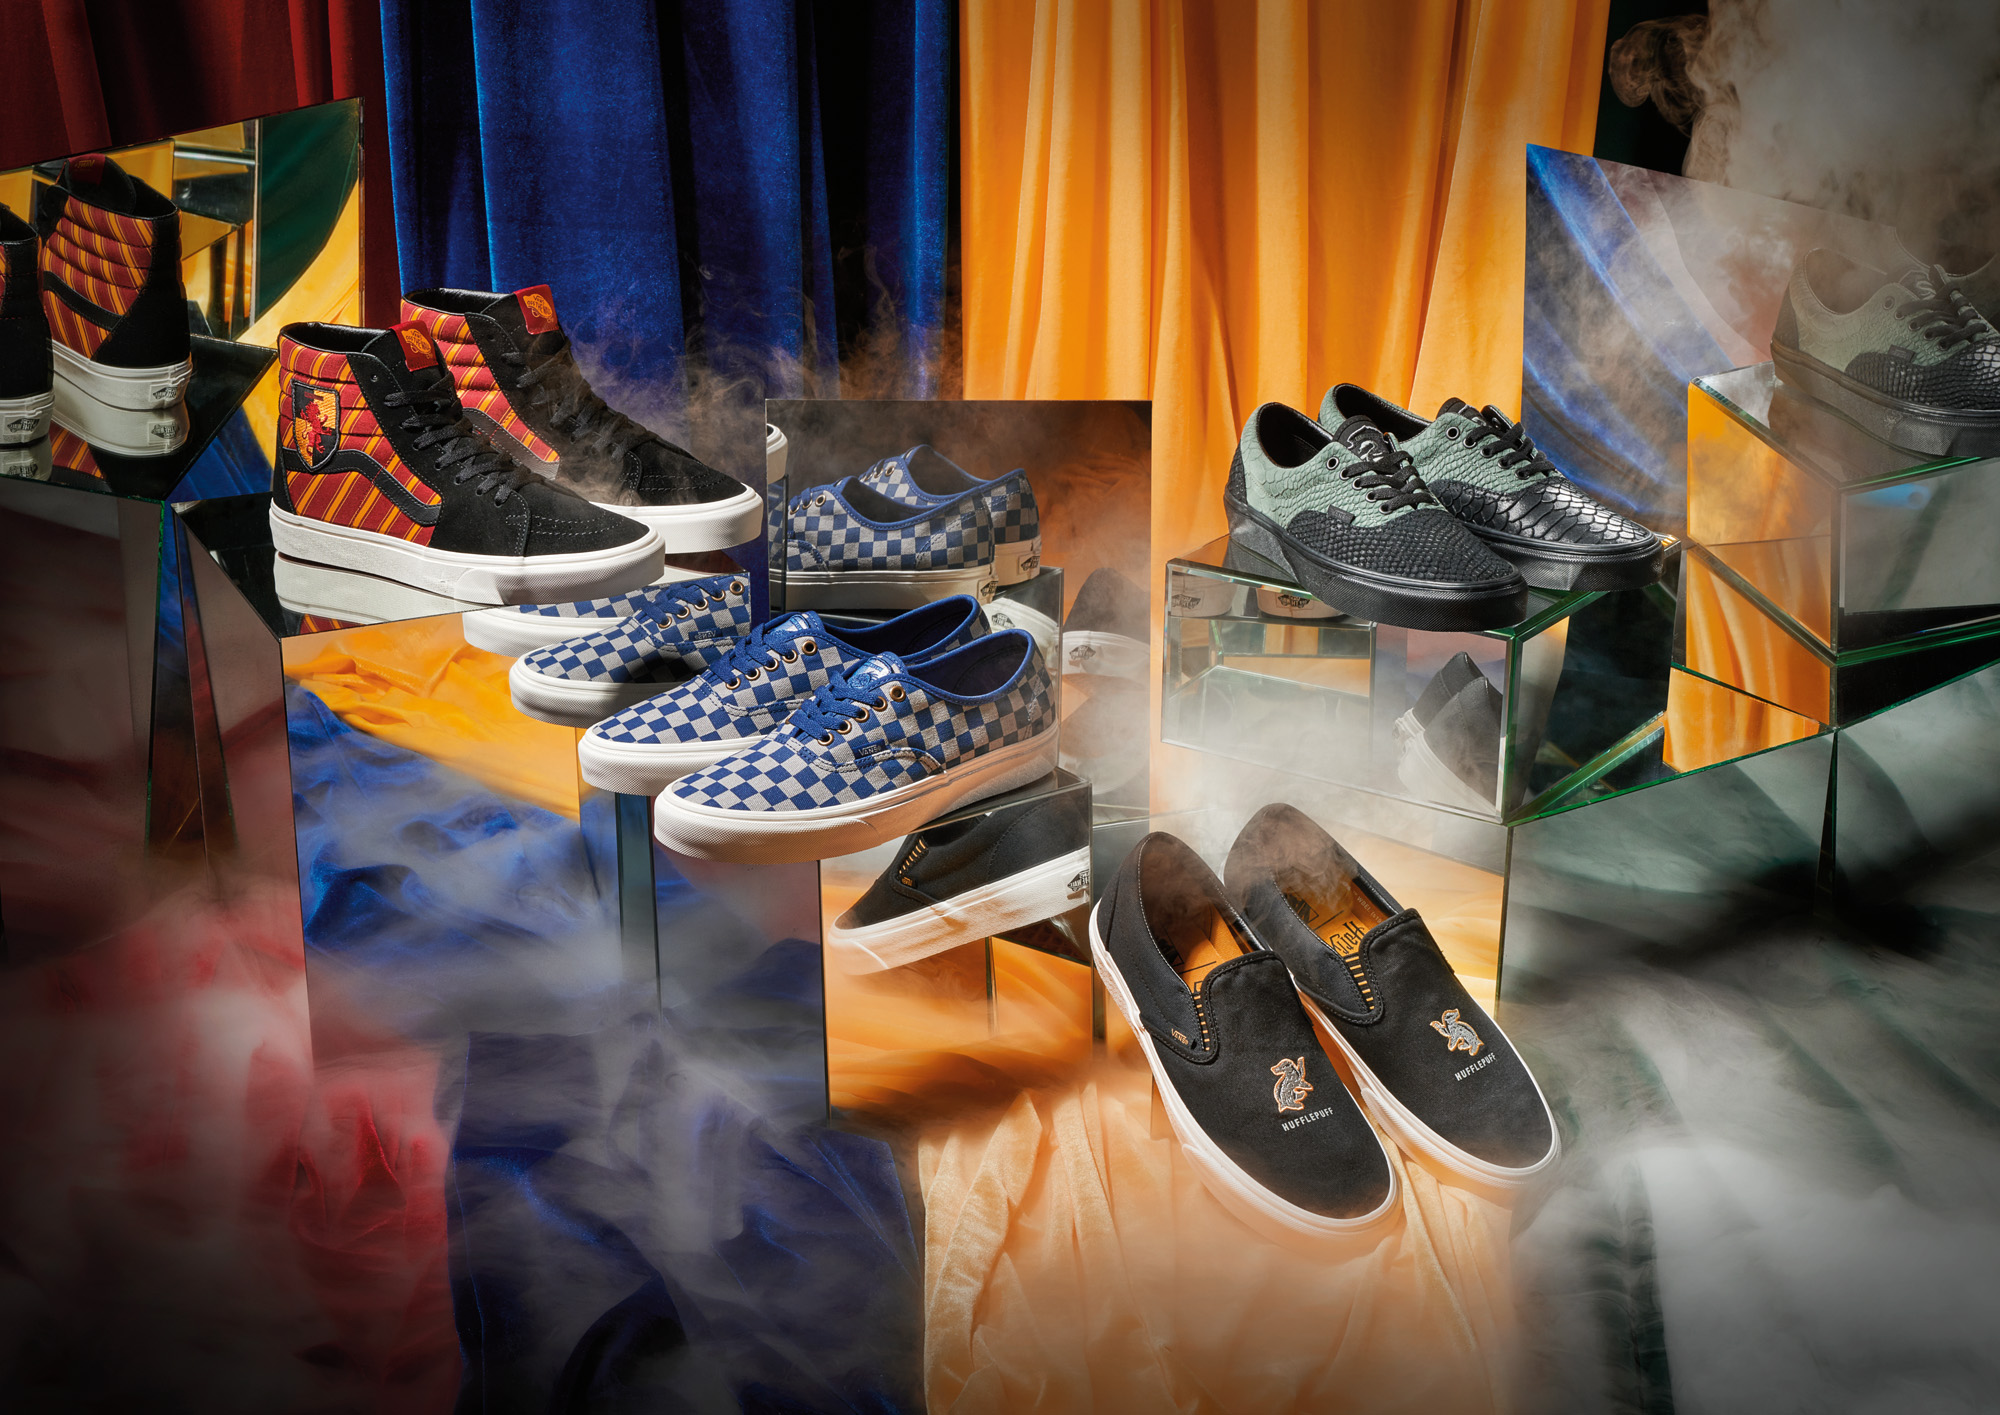 Vans' Harry Potter sneaker collection goes on sale - CNN Style